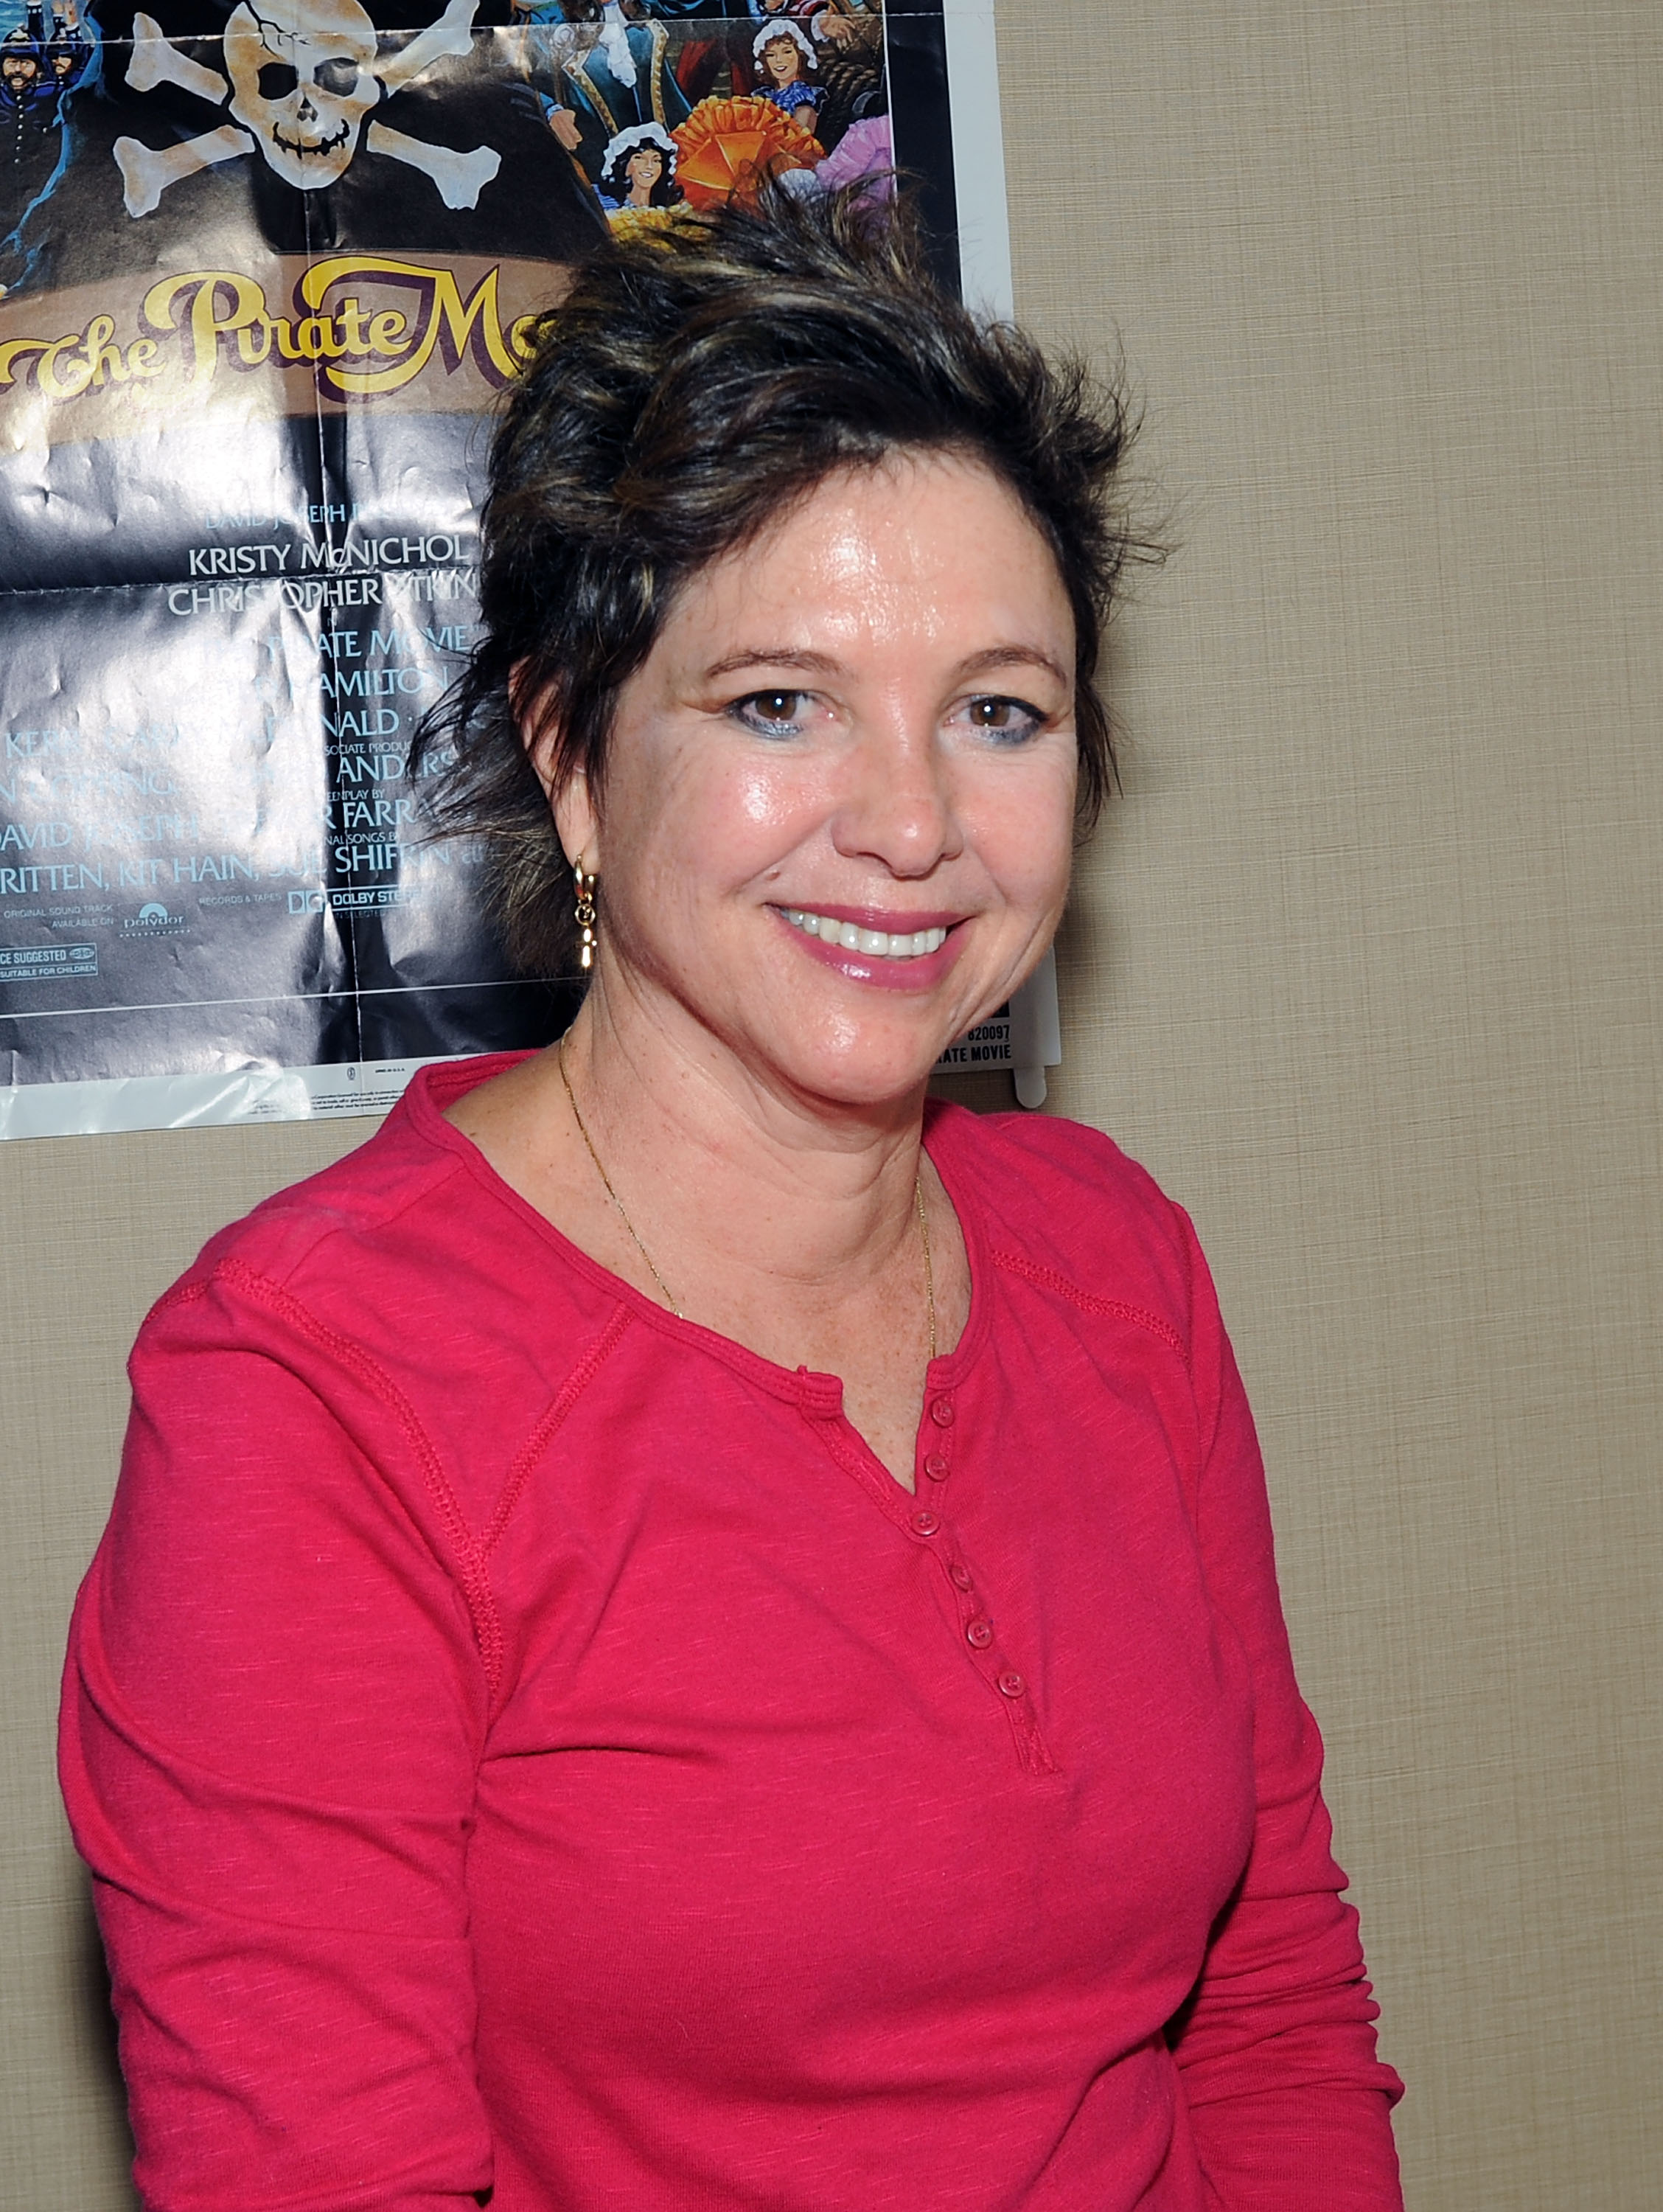 Kristy McNichol at Chiller Theatre Expo on October 28, 2016, in Parsippany, New Jersey. | Source: Bobby Bank/WireImage/Getty Images